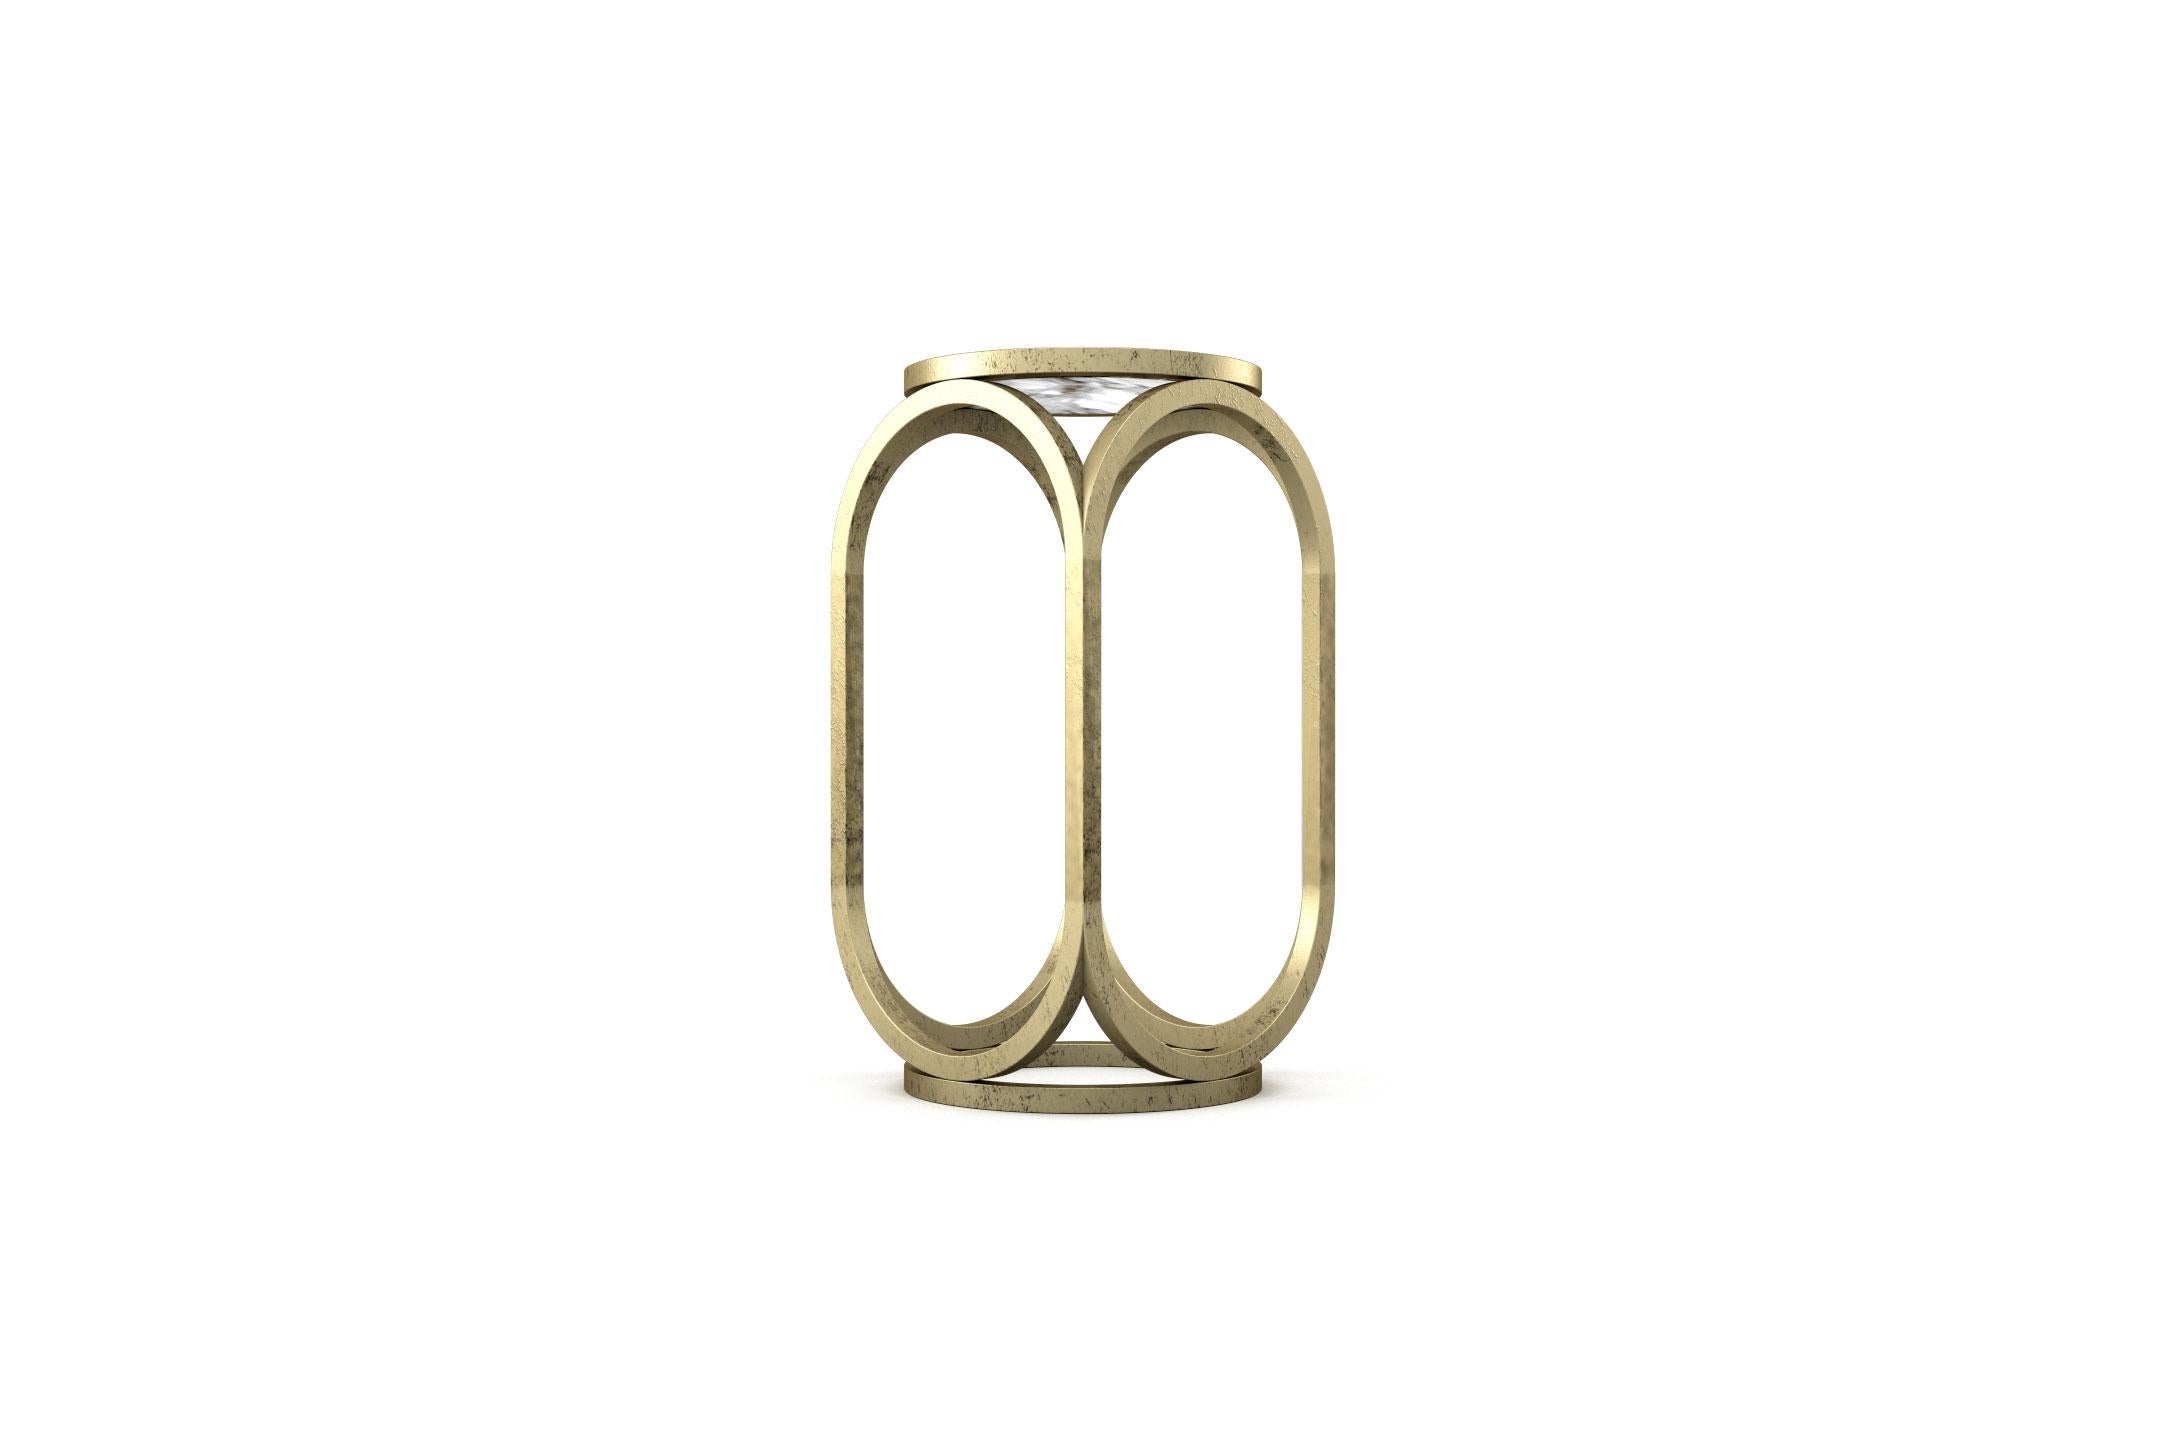 European Crescent Side Table - Modern Brass Side Table For Sale